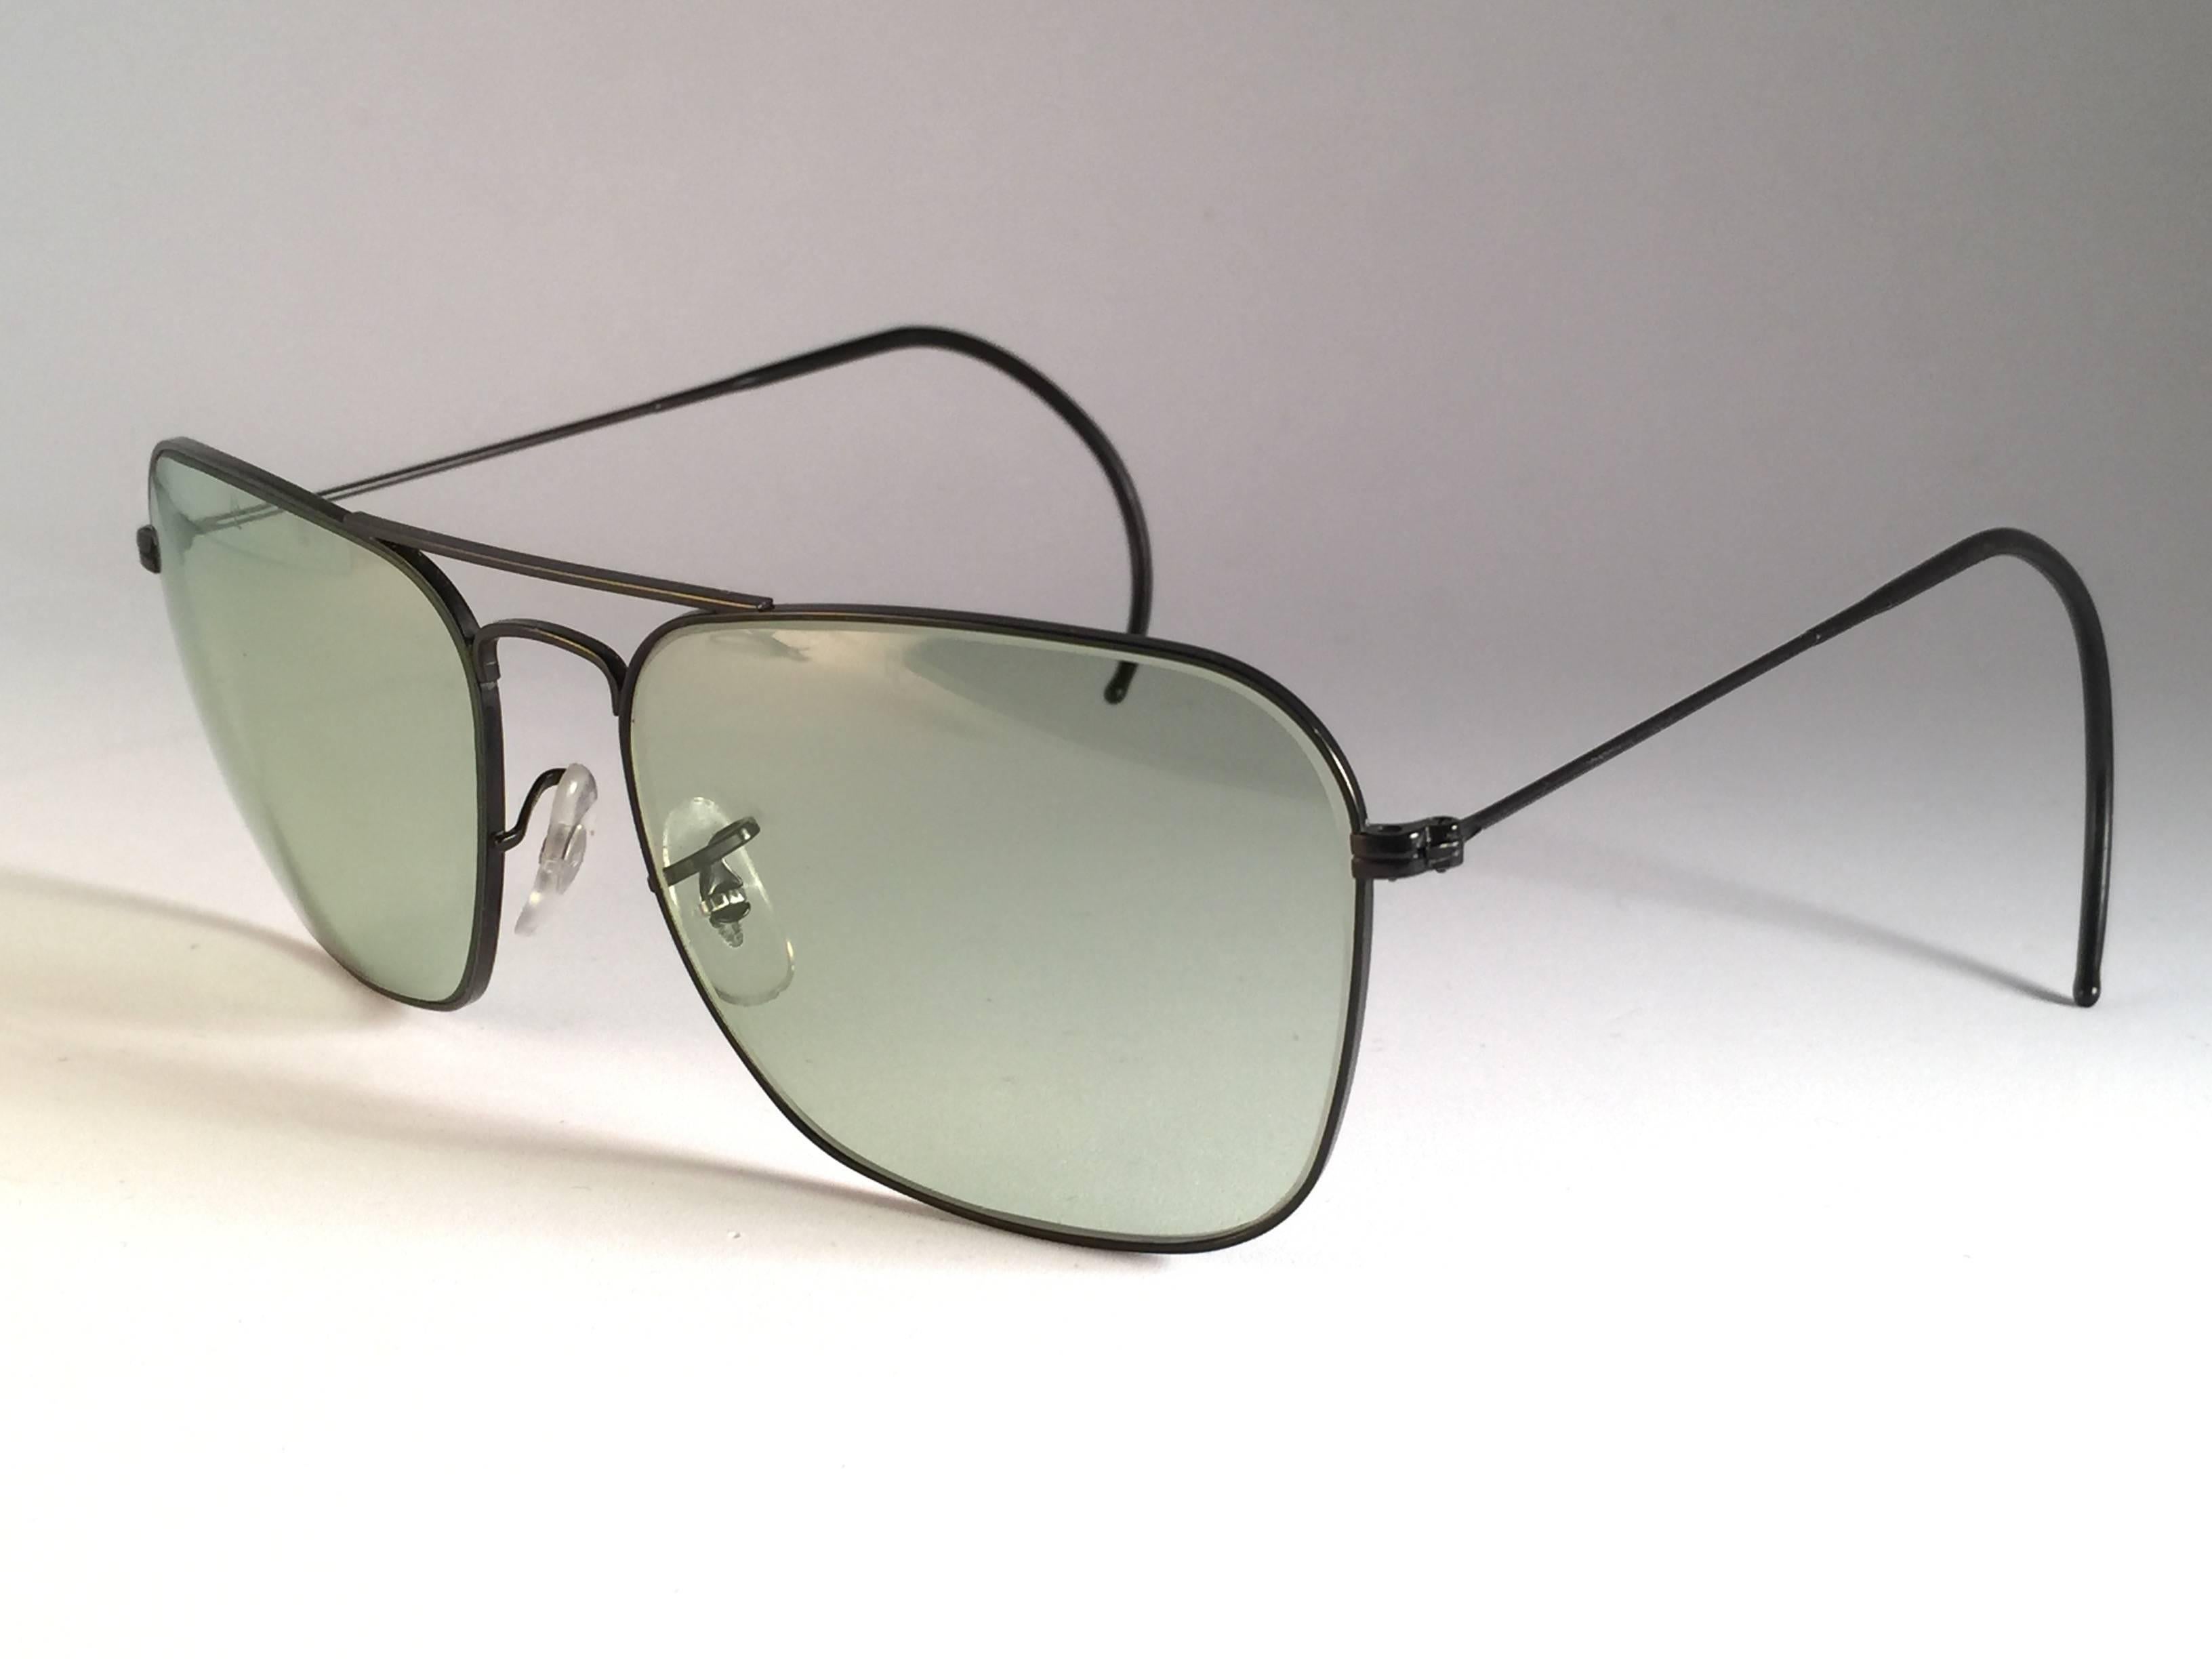 New Vintage Ray Ban Caravan Matte black with grey changeable lenses in 58MM size. B&L etched in the lenses, so mid 1970's.  Please notice this item is nearly 50 years old and may show minor sign of wear due to storage.
Comes with its original Ray